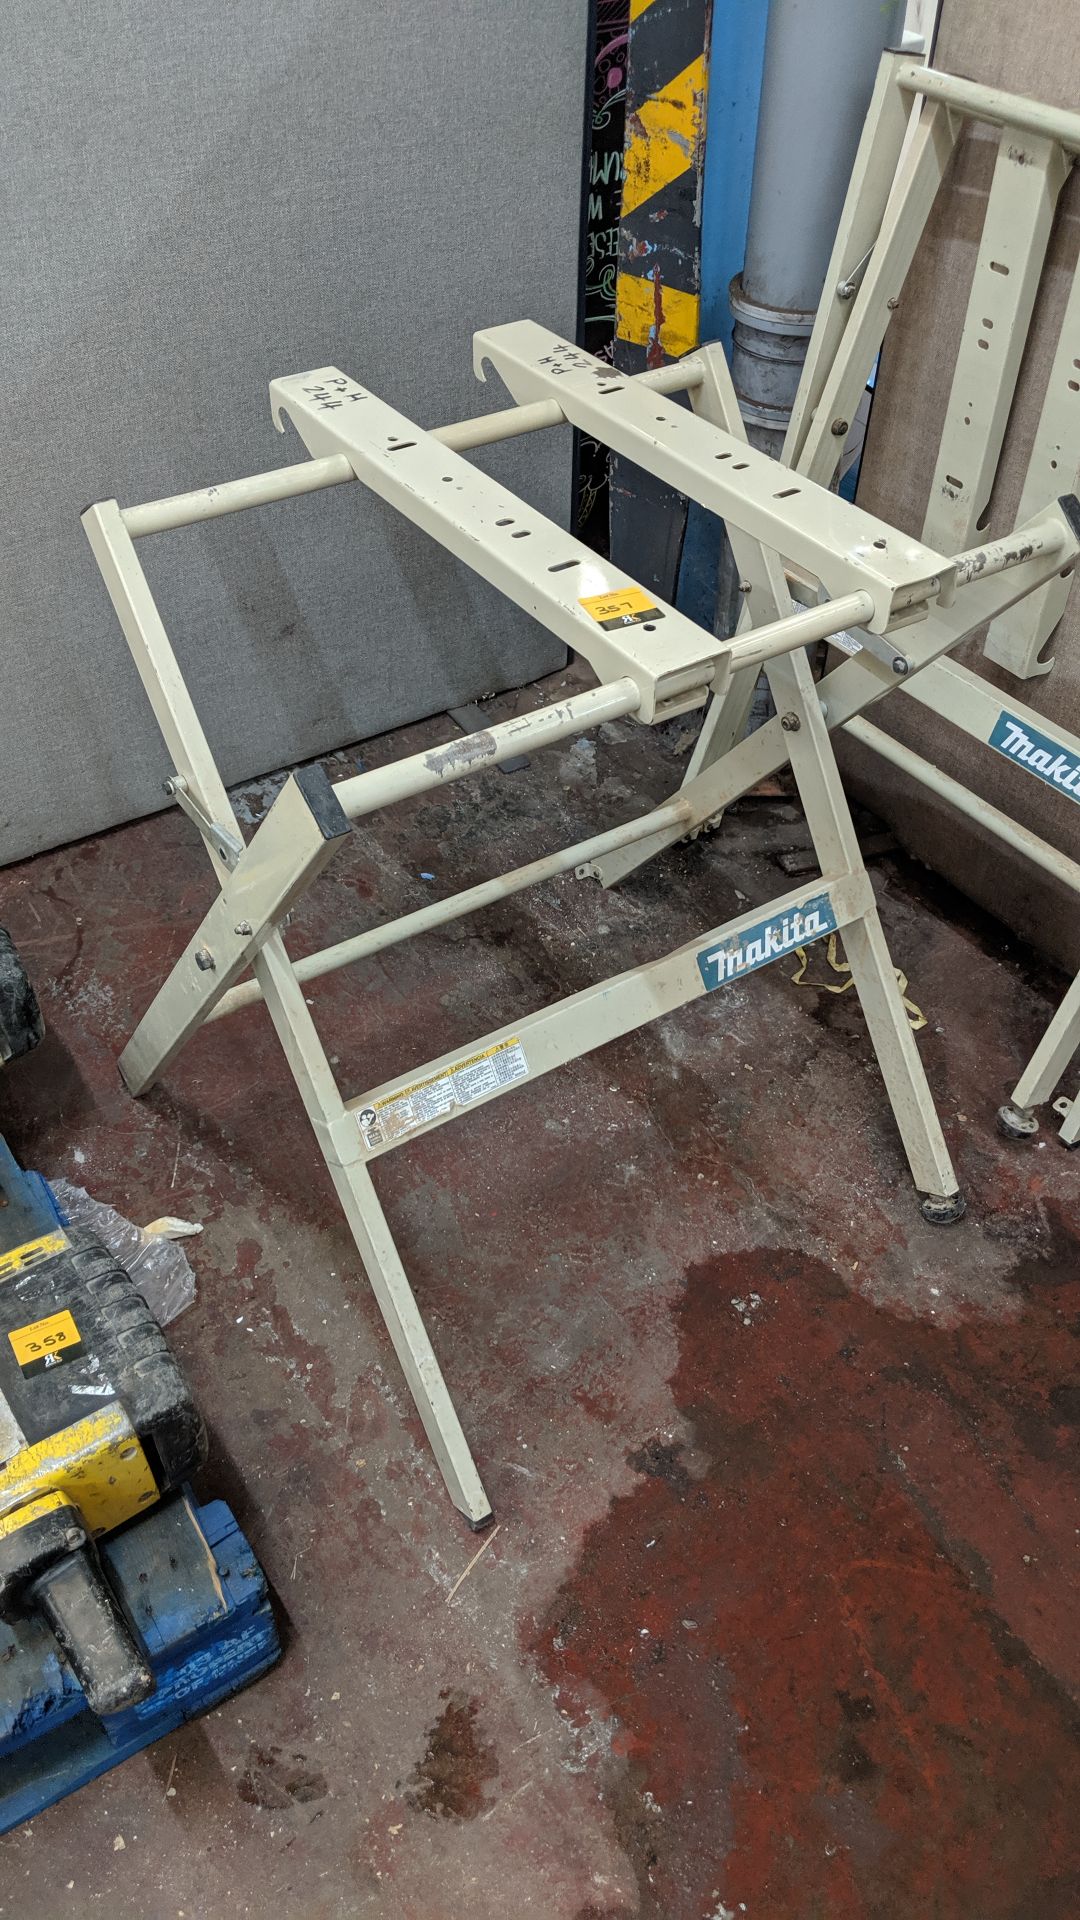 Makita mitre saw folding stand IMPORTANT: Please remember goods successfully bid upon must be paid